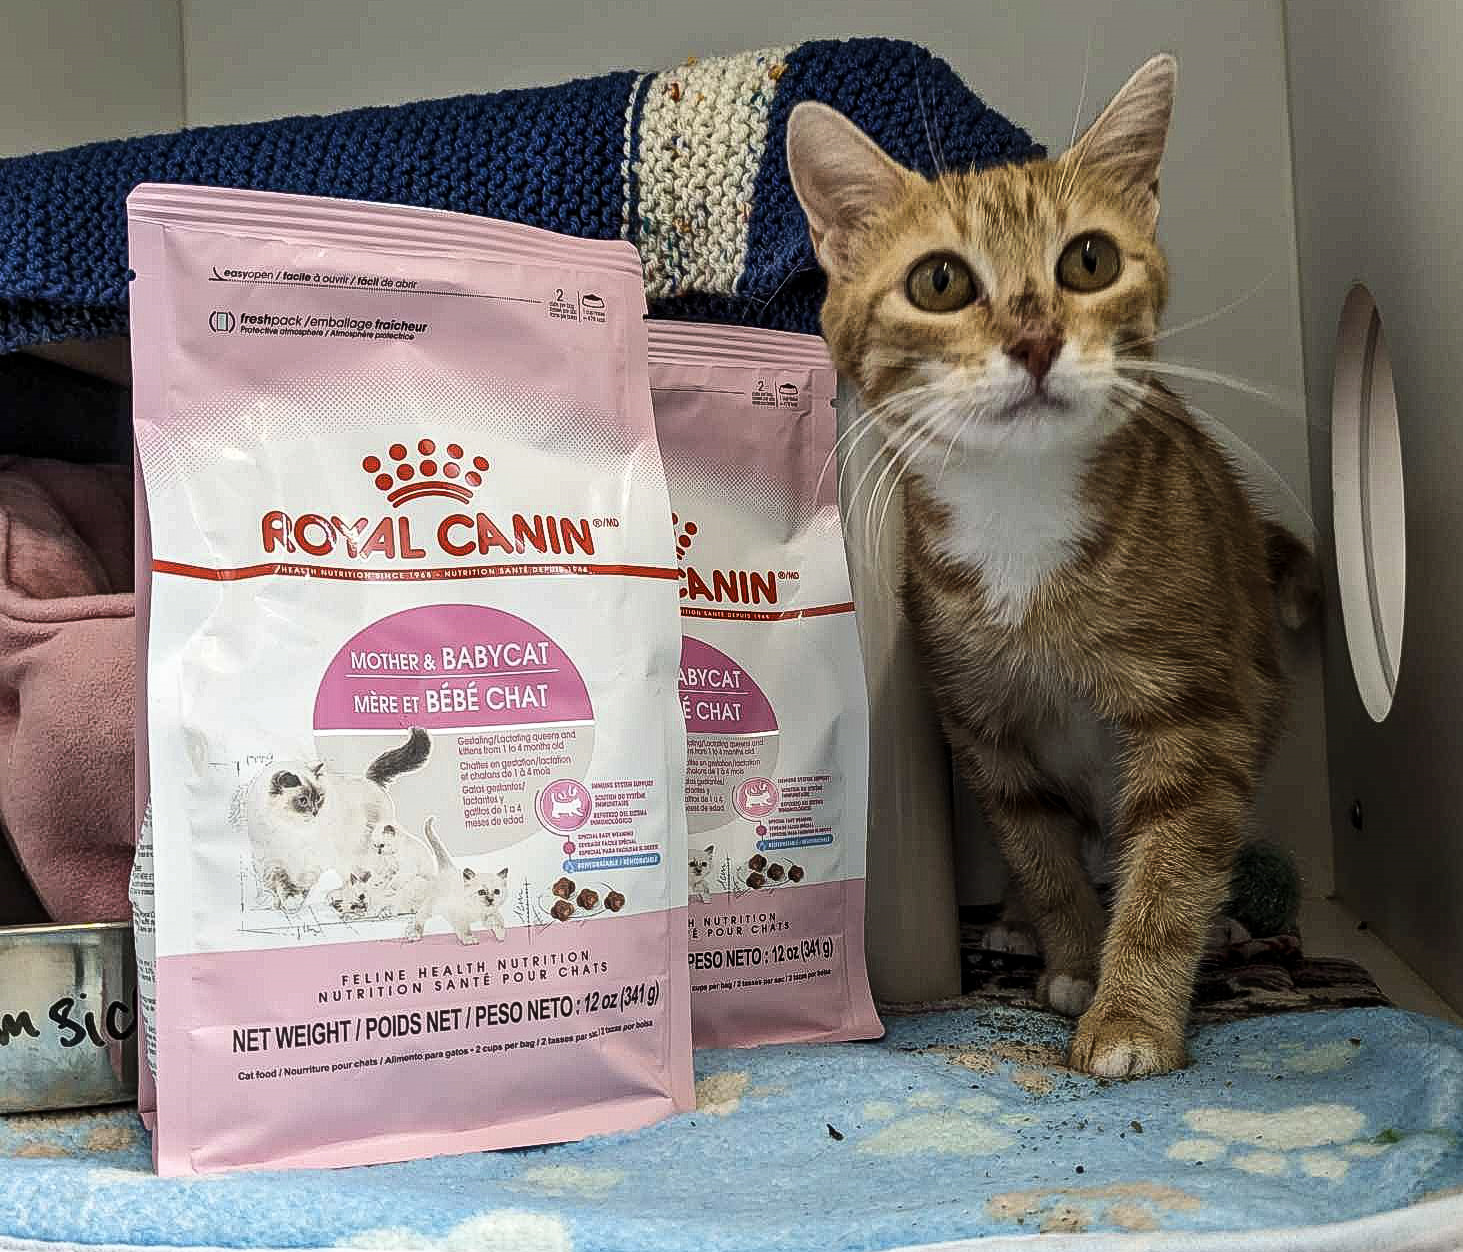 Cat standing next to a Royal Canin bag of food. 